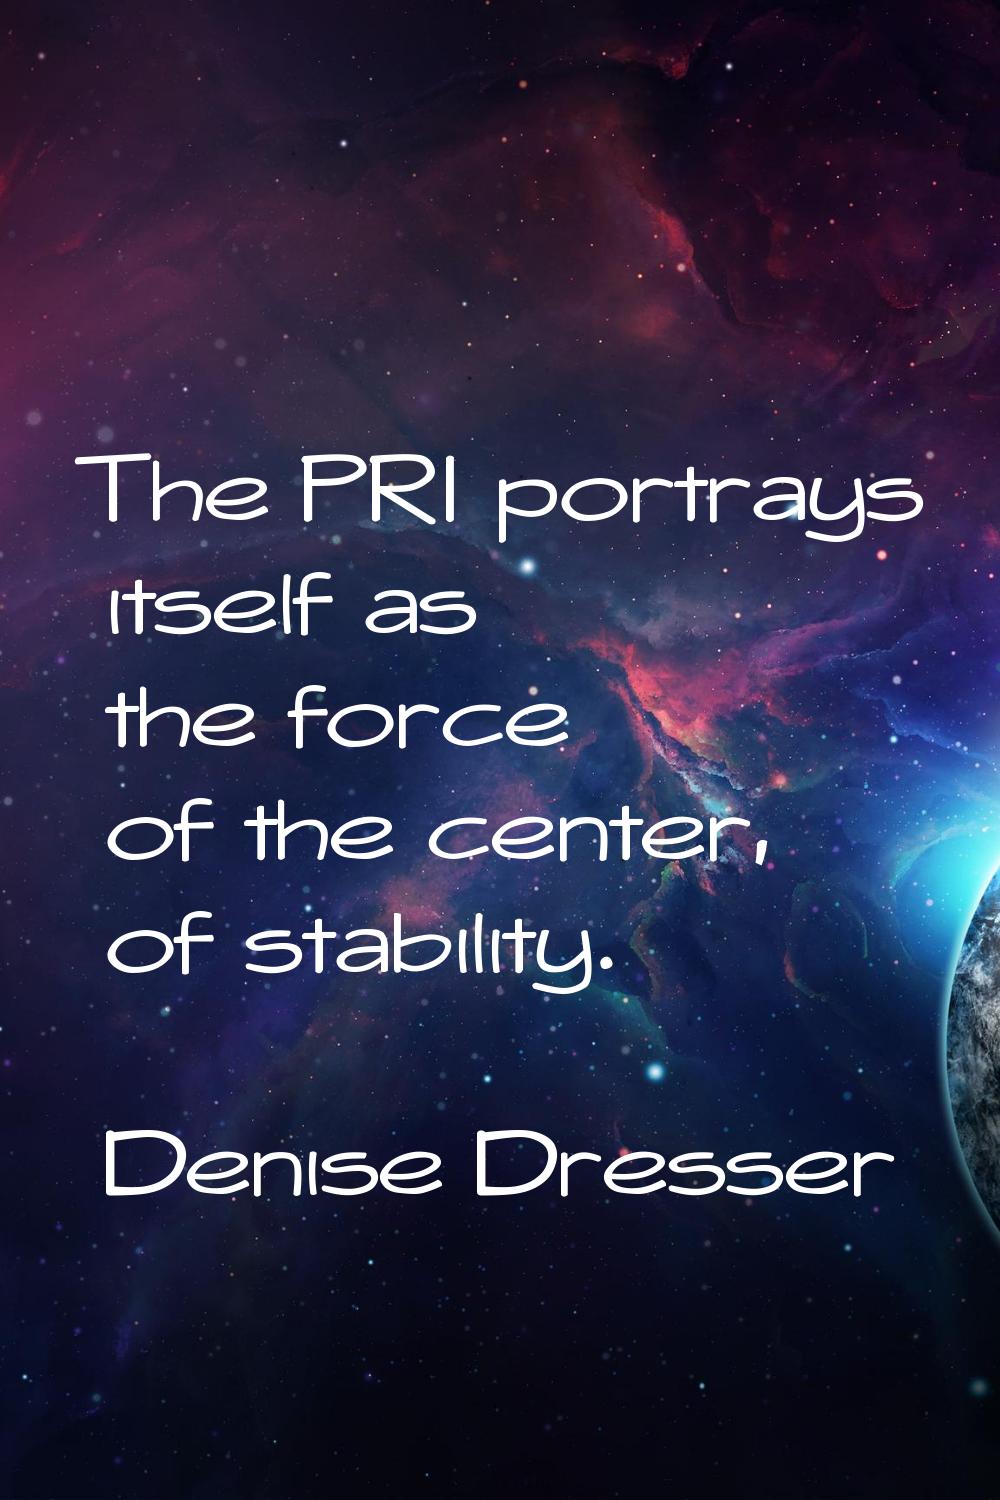 The PRI portrays itself as the force of the center, of stability.